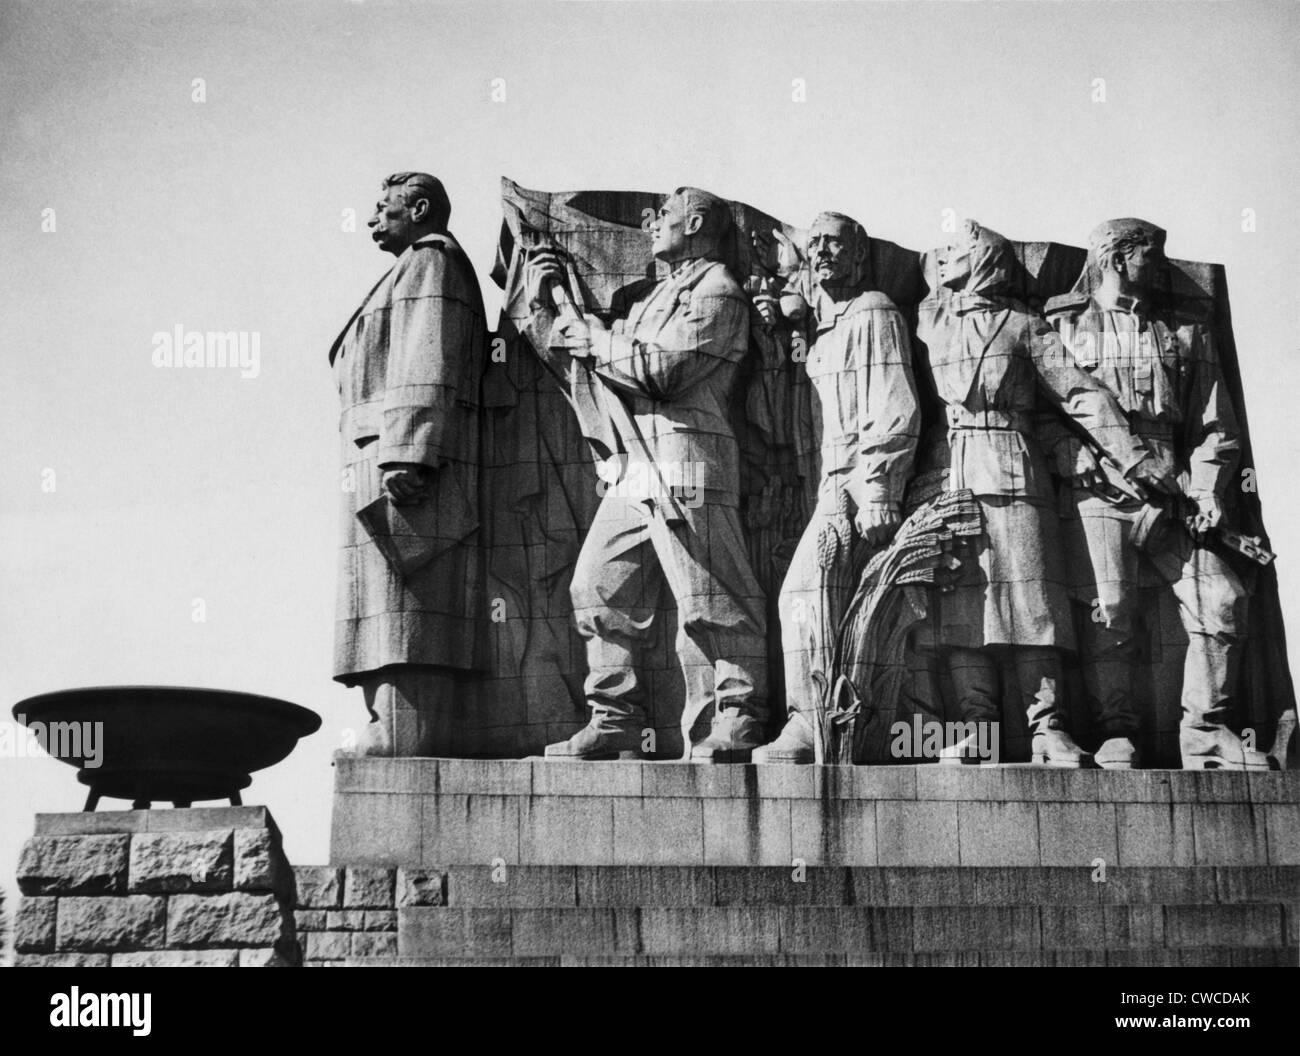 Communist monument in Prague, Czechoslovakia. Sculpture of Joseph Stalin shows the discredited Soviet dictator leading a Stock Photo